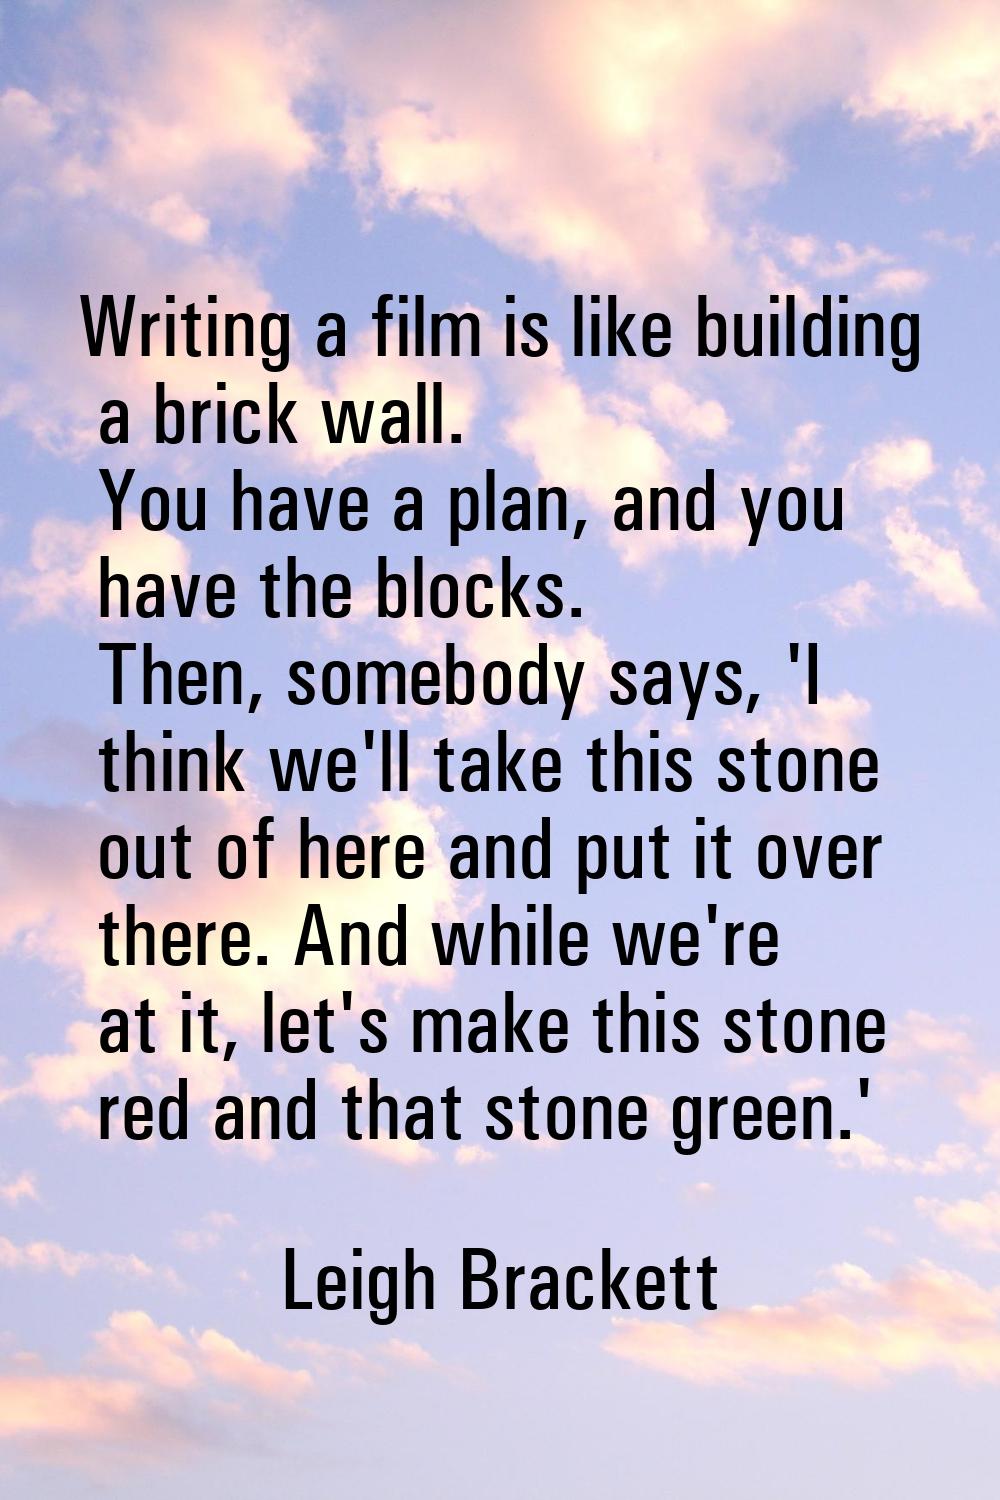 Writing a film is like building a brick wall. You have a plan, and you have the blocks. Then, someb